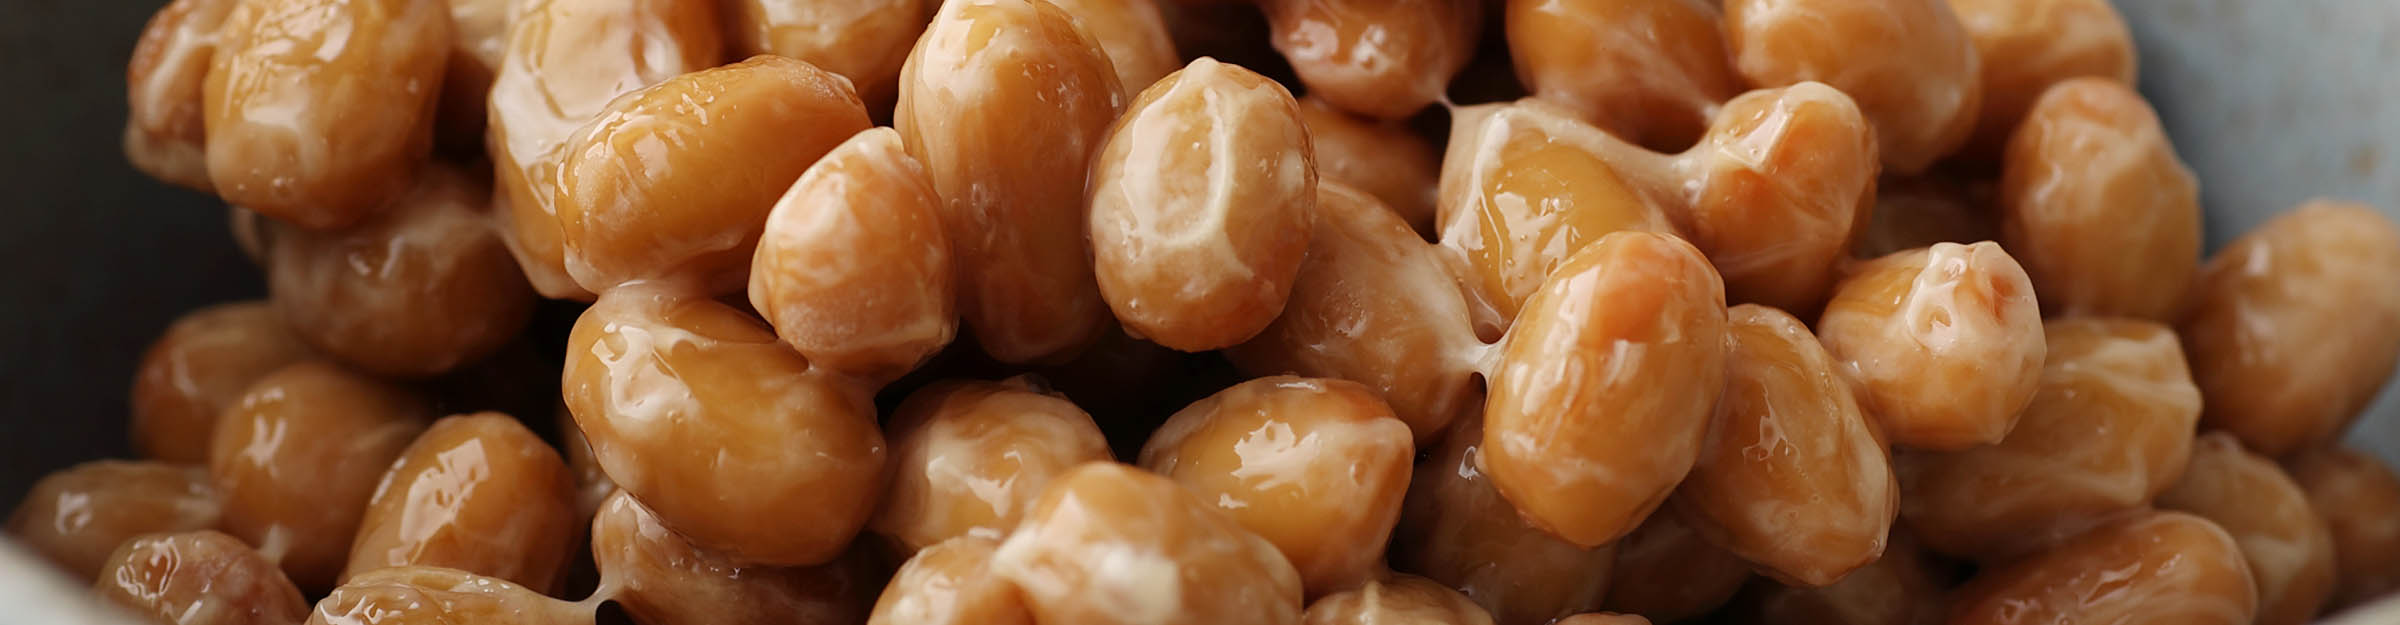 How to enjoy natto in Japan?